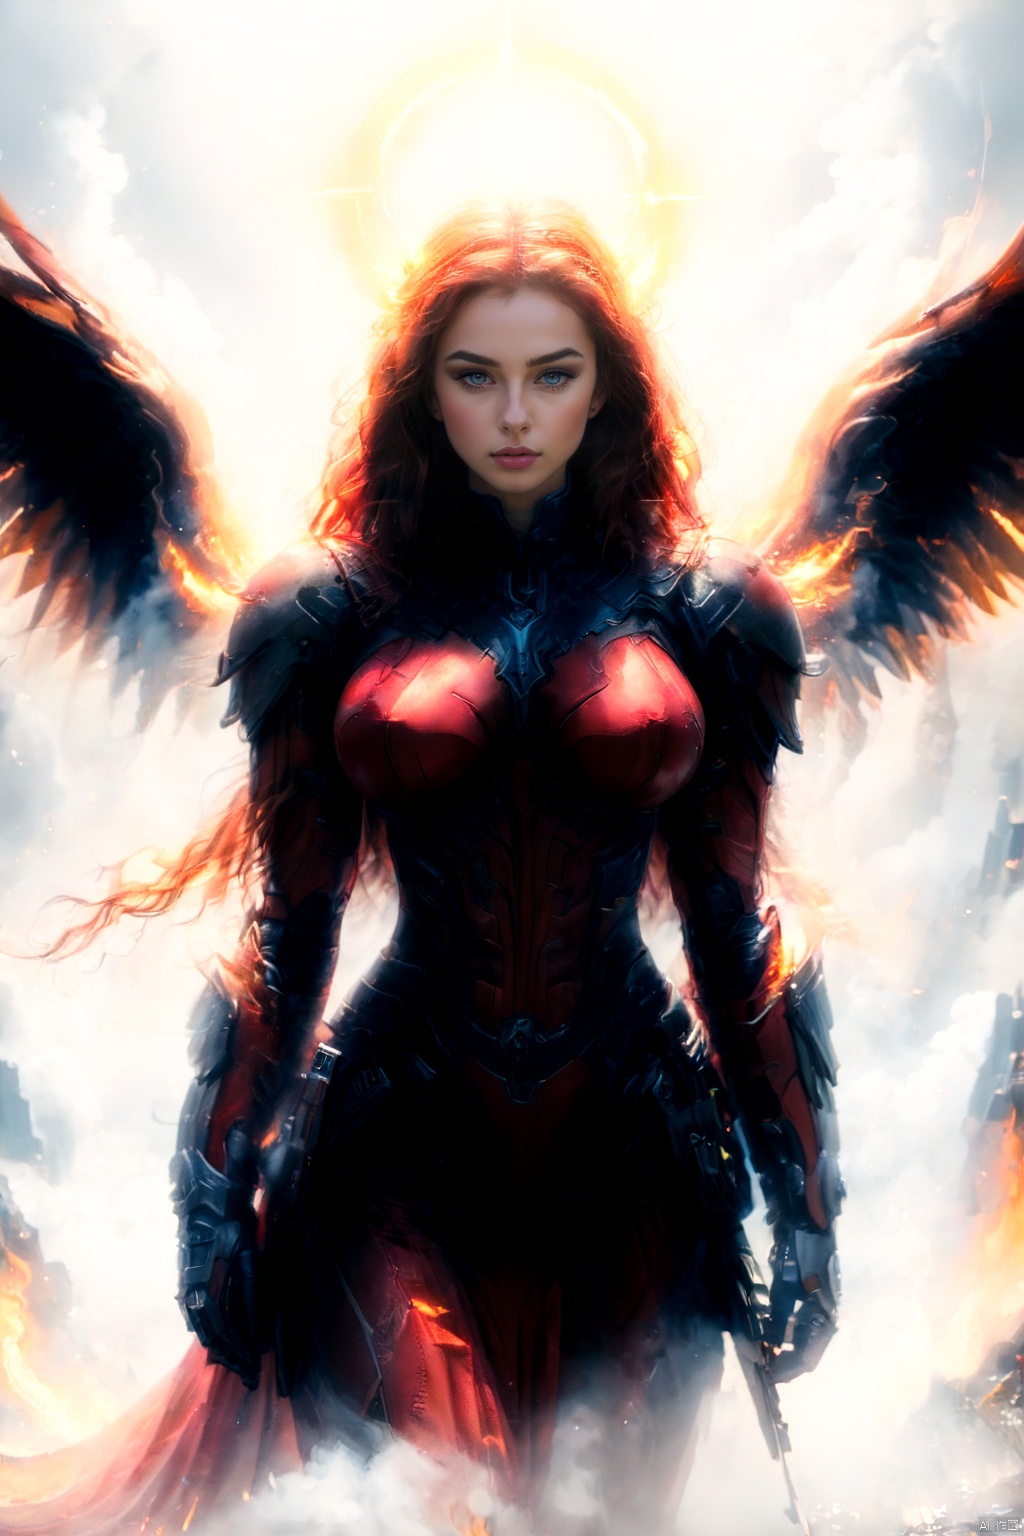 masterpiece, top quality,phoenix dark is x-men, beautiful and aesthetic:1.2, (1girl:1.3), (full body:1.5),red suitbody ,looking at viewer,fire hair, extreme detailed,(fire hands:1.5),fire,smoke,goddess, detailed, detail fingers, detail face, masterpiece,ultra realistic,32k,extremely detailed CG unity 8k wallpaper, best quality, Cinematic photography, movie mood, cinematic light, compelling composition, storytelling elements, conveys emotion, mood, and narrative depth, creating visually striking images that feel like still frames from a film, Cinematic portrait photography, capture subject in a way that resembles a still frame from a movie, cinematic lighting, story, narrative quality, drawing viewers into the scene and evoking a sense of cinematic immersion, capturing emotion, professional, engaging, compelling composition, night photography, nocturnal beauty, city lights, starry skies, celestial wonders, moonlit landscapes, urban glow, capturing the essence of darkness, ethereal atmosphere, dramatic shadows, magical ambiance, long exposure techniques, expert use of light sources,MECHA ANGEL SOLDIER,TRIDENT,Heavenly Breasts